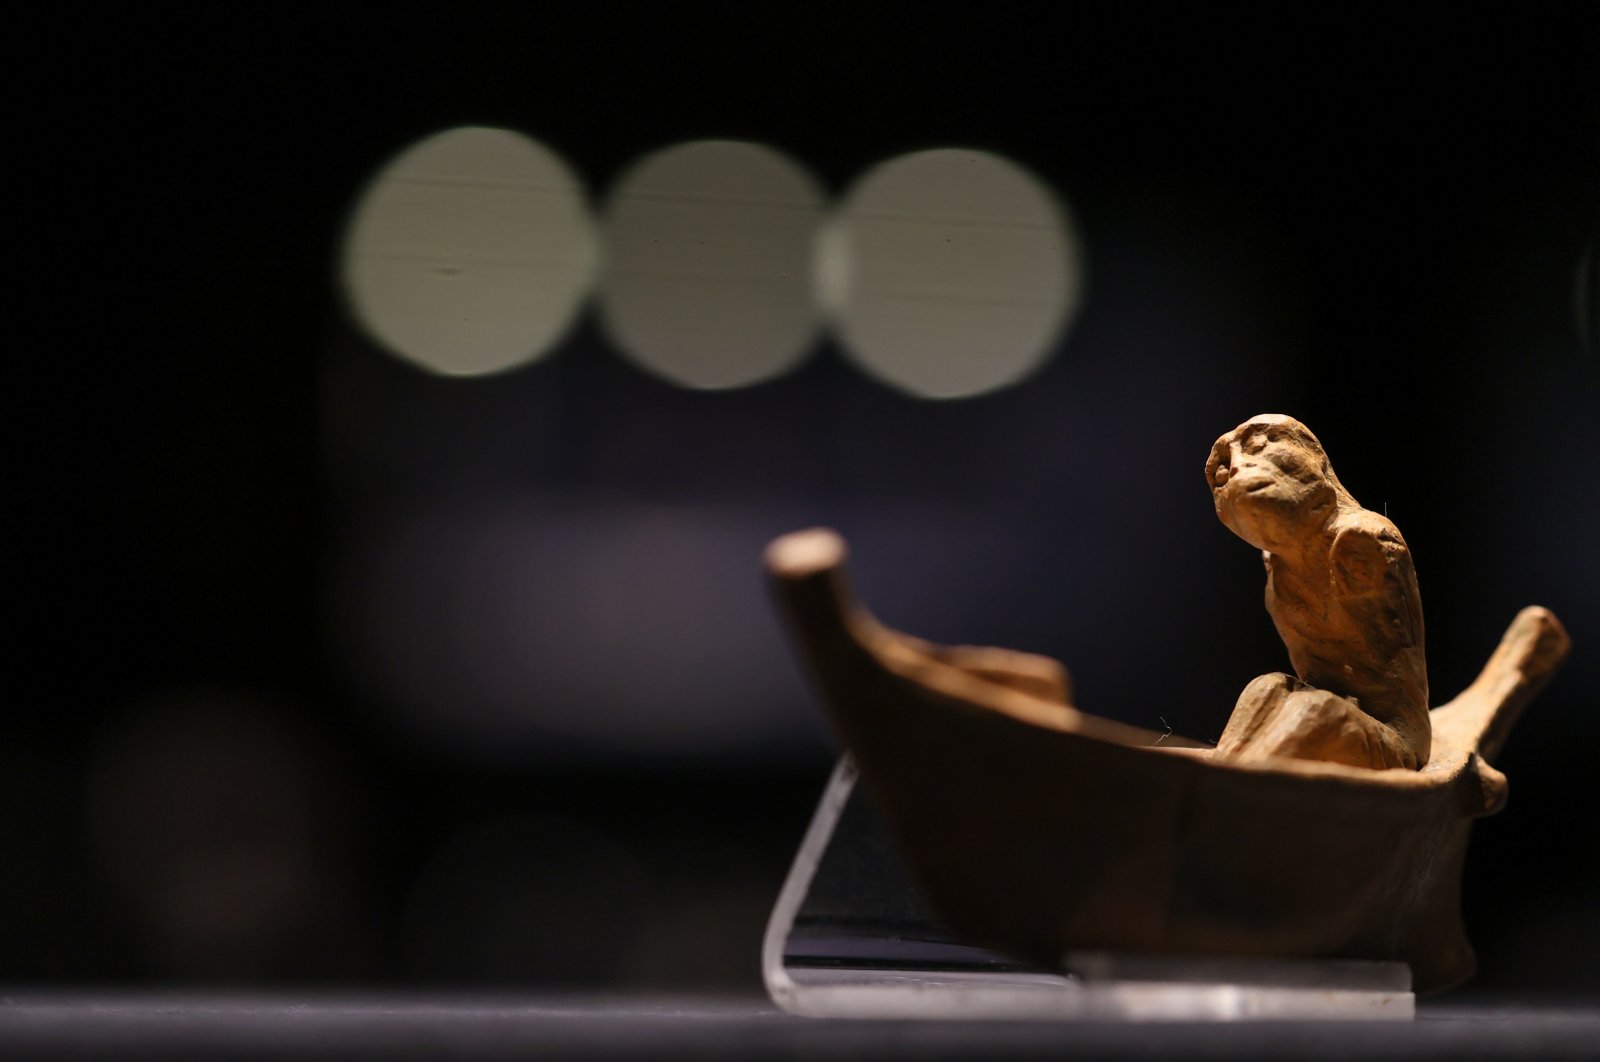 The 2,400-year-old statuette depicting the ferryman of the dead, Charon, on display for the first time at the Izmir Archeology Museum, Türkiye, Nov. 15, 2022. (AA Photo)